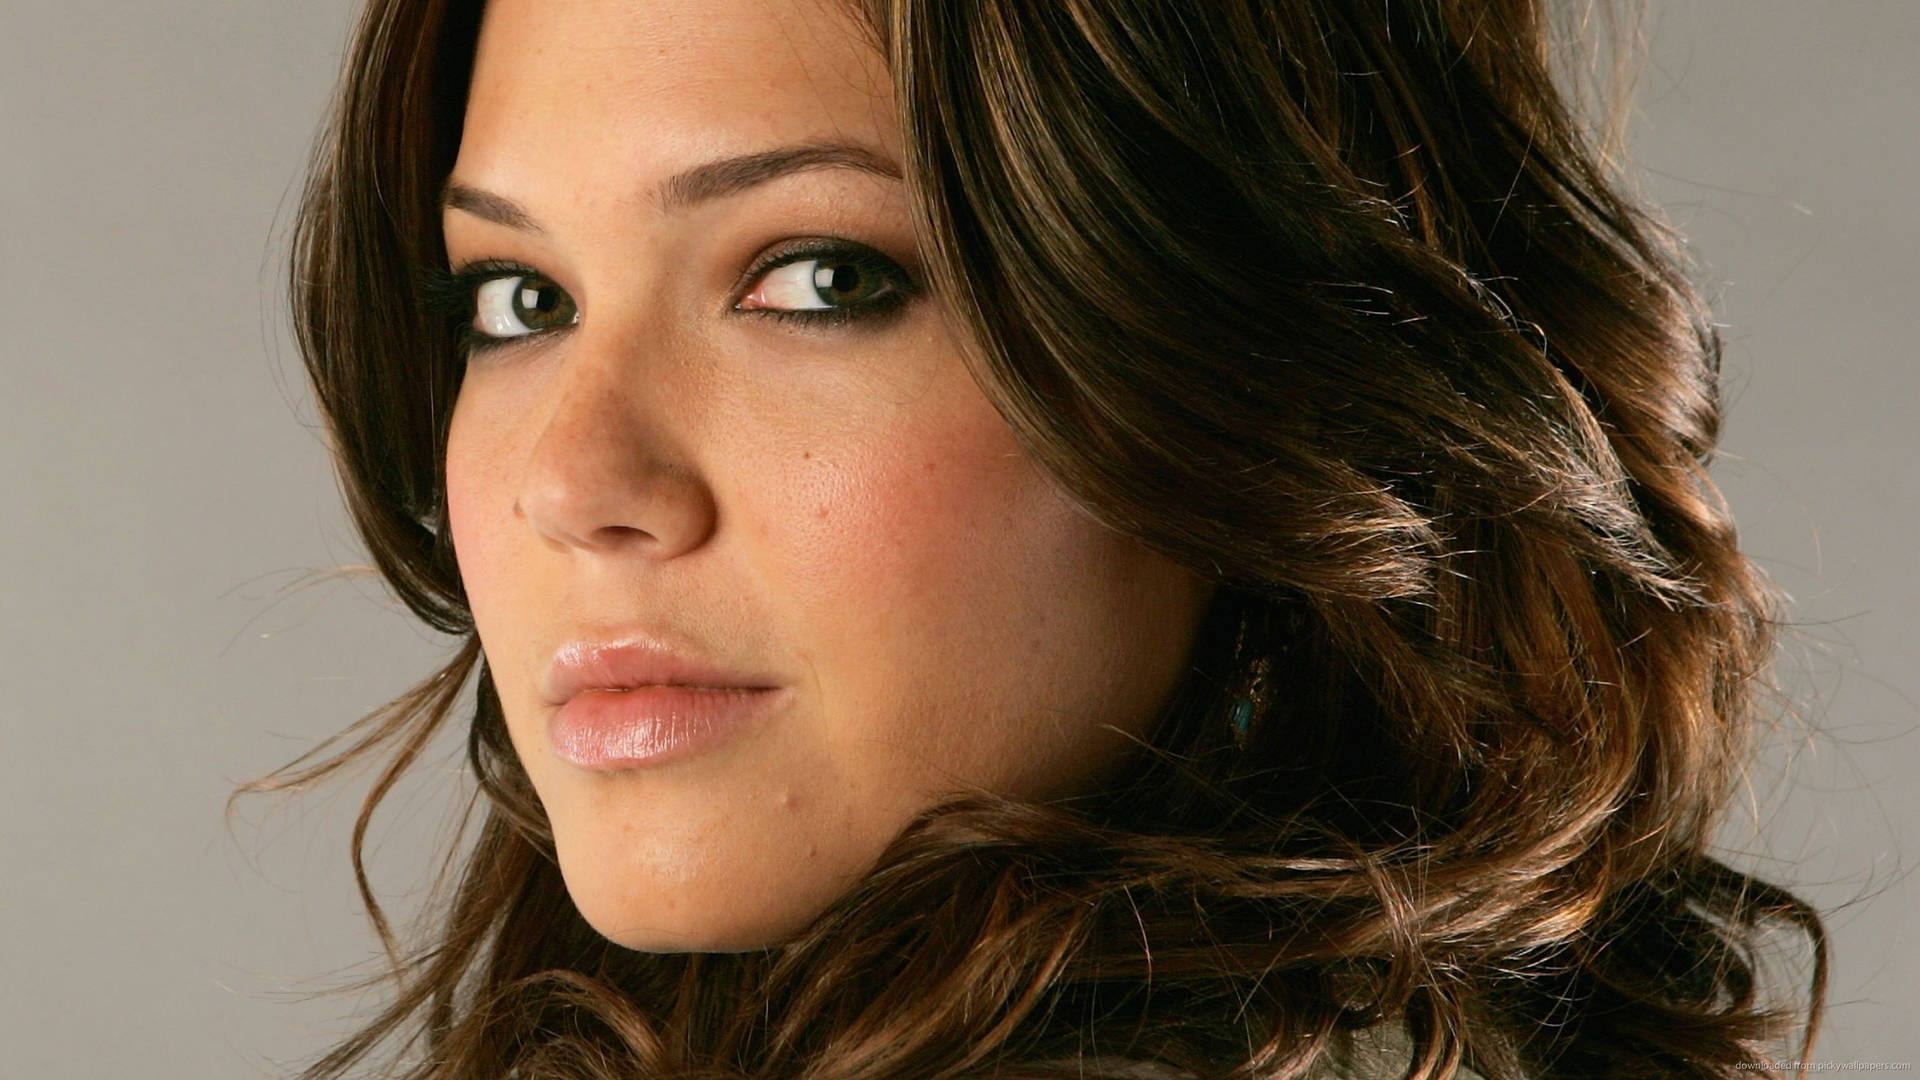 Free Mandy Moore Wallpaper Downloads, [100+] Mandy Moore Wallpapers for  FREE 